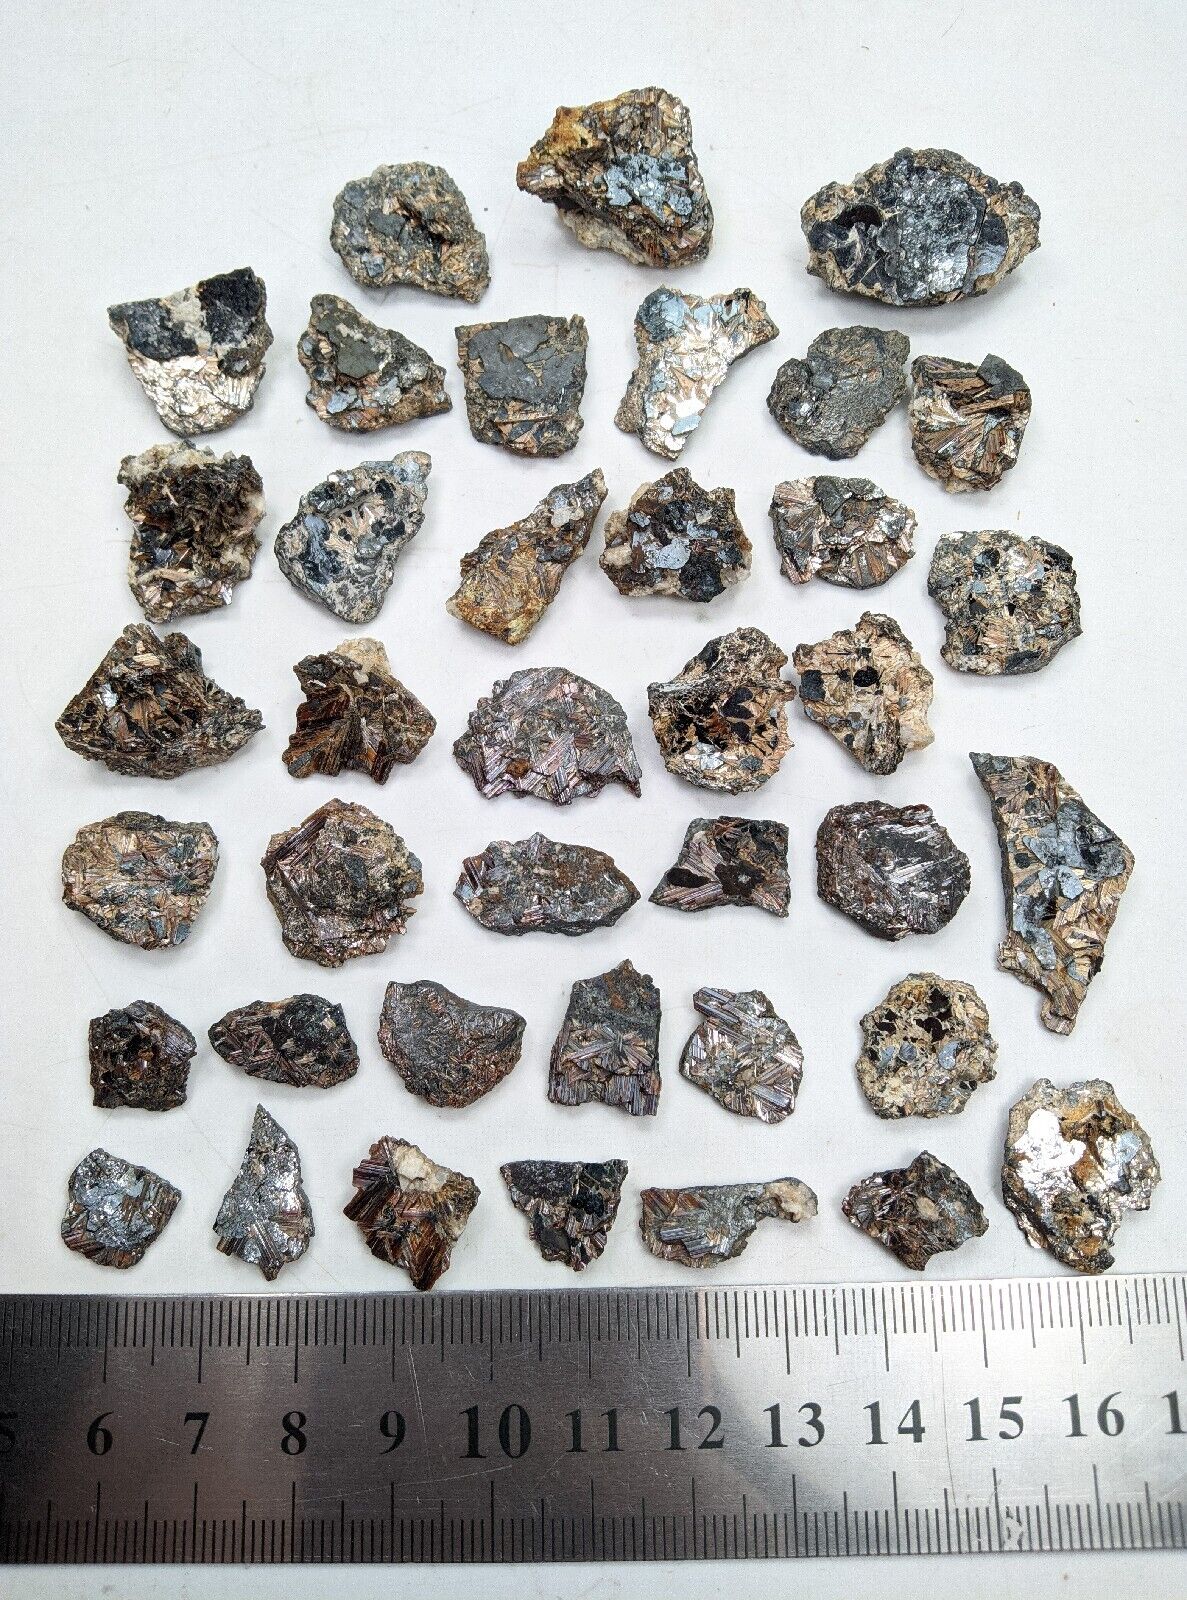 Sagenite var of Rutile with hematite (40 small pieces lot) 